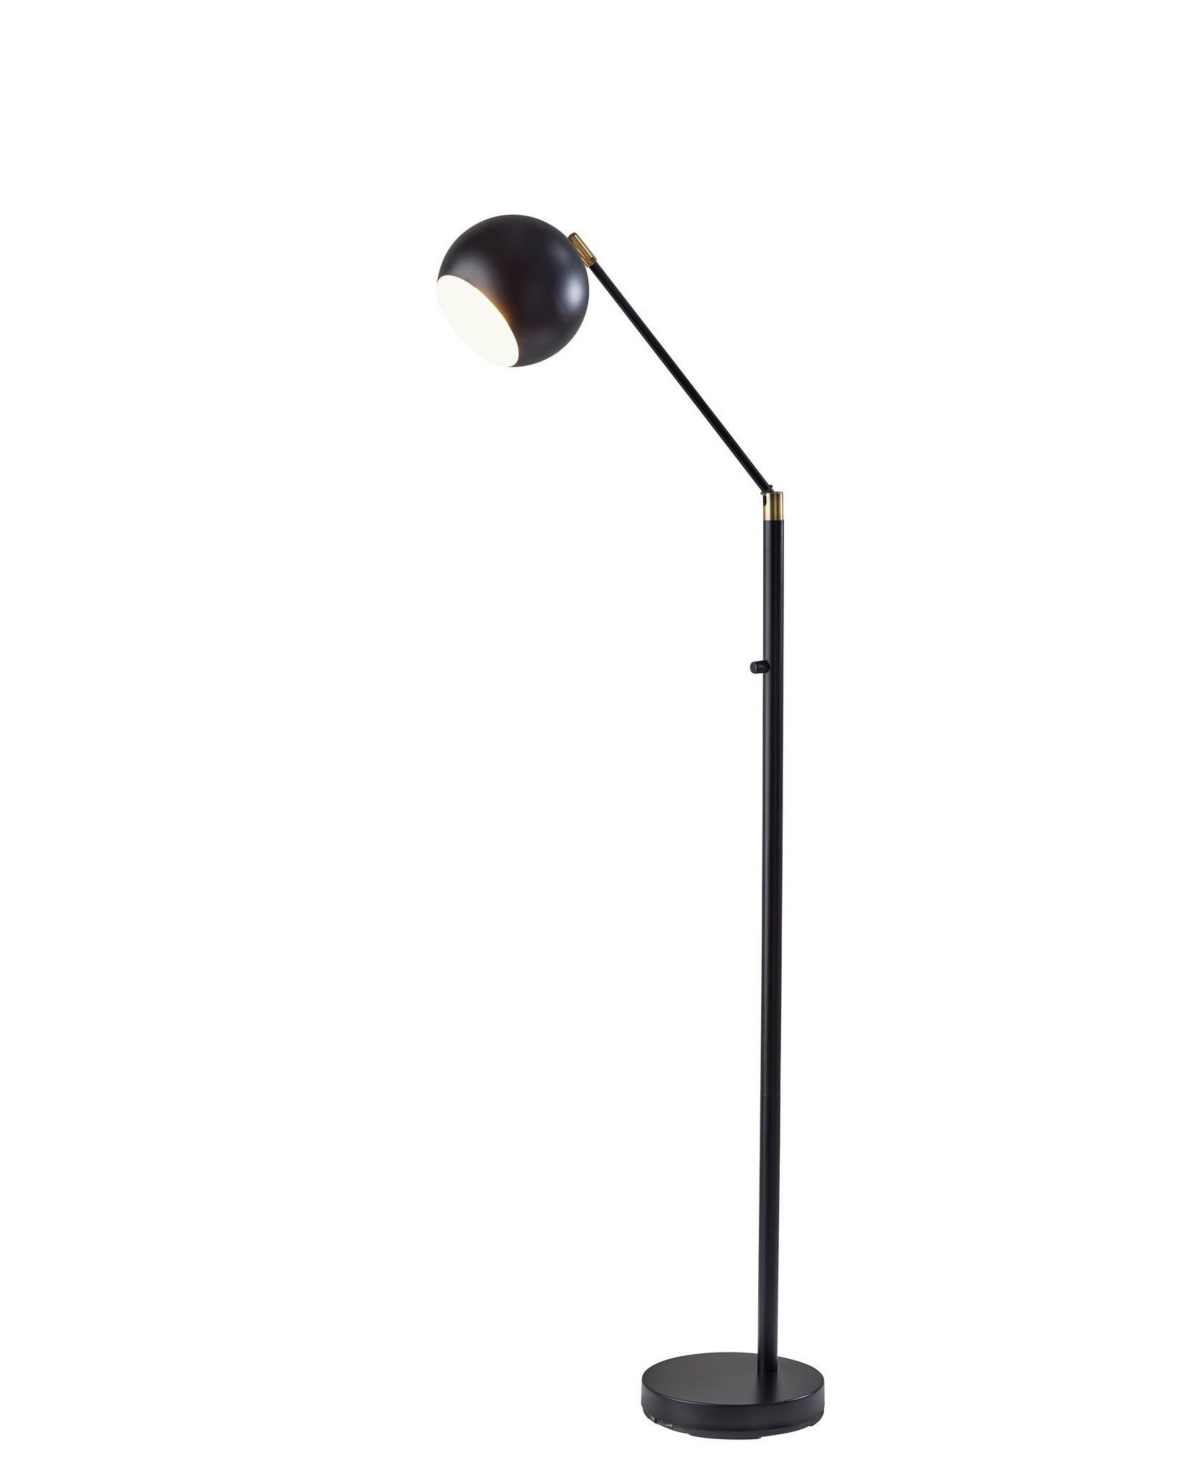 Adesso Ashbury Floor Lamp In Black With Antique-like Brass Accents